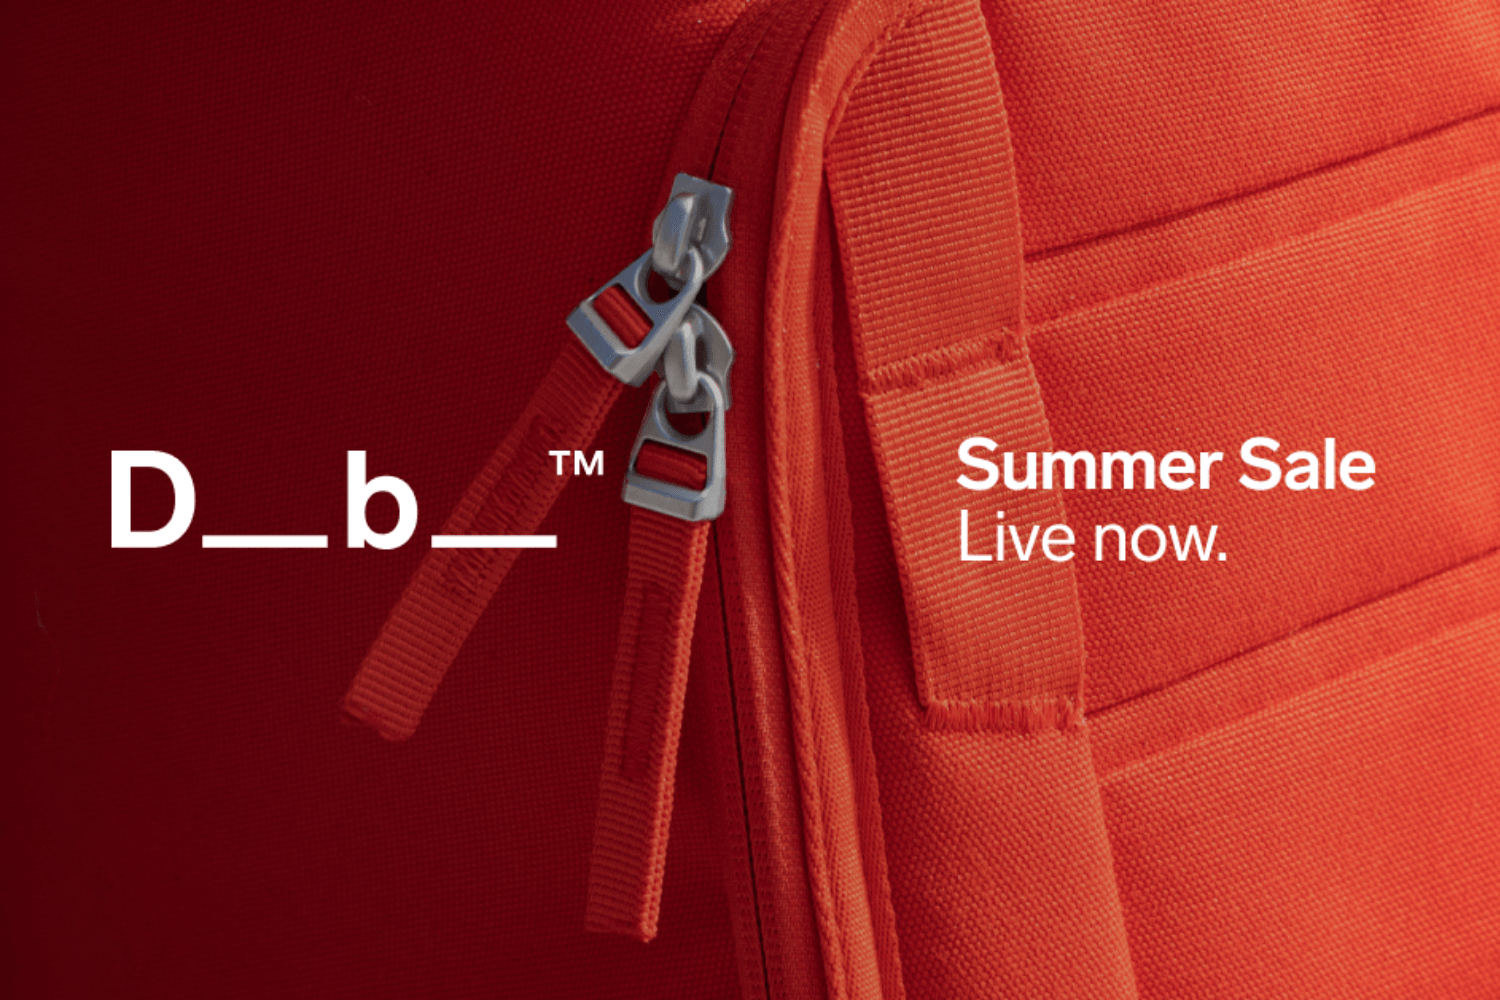 Shop your luggage for summer holidays in the Summer Sale at Db